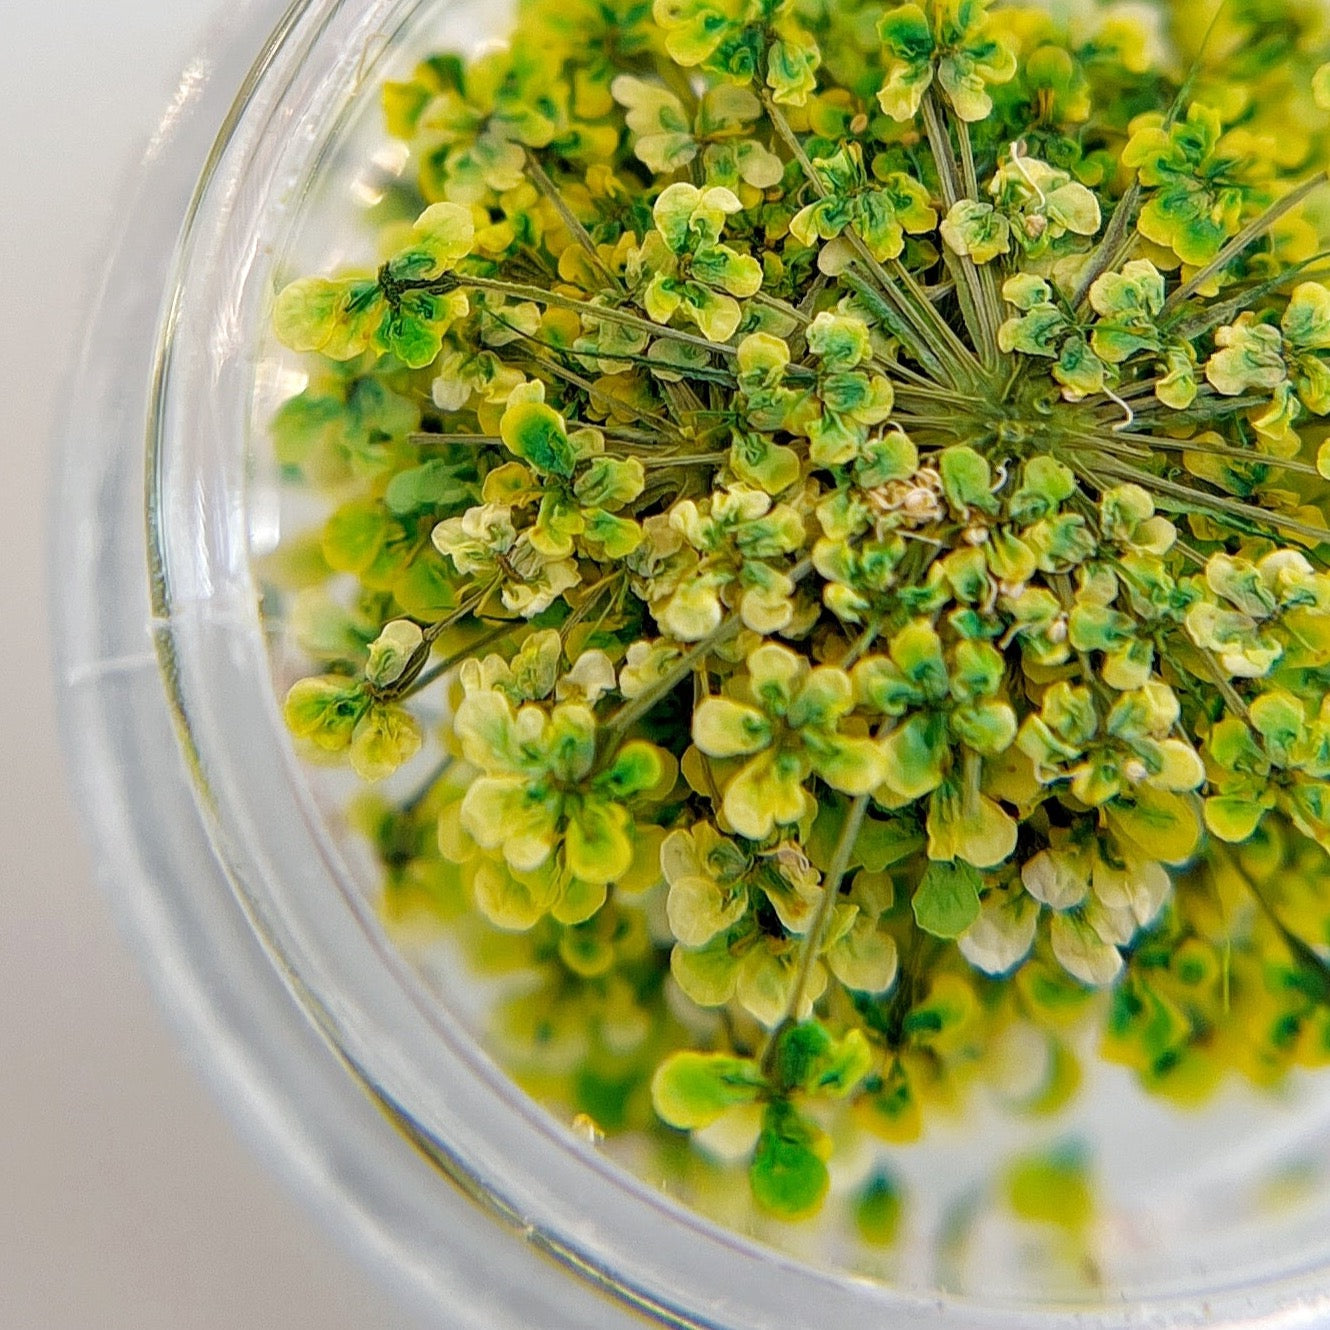 Detail view of pressed flower clusters in clear jar on white background. 